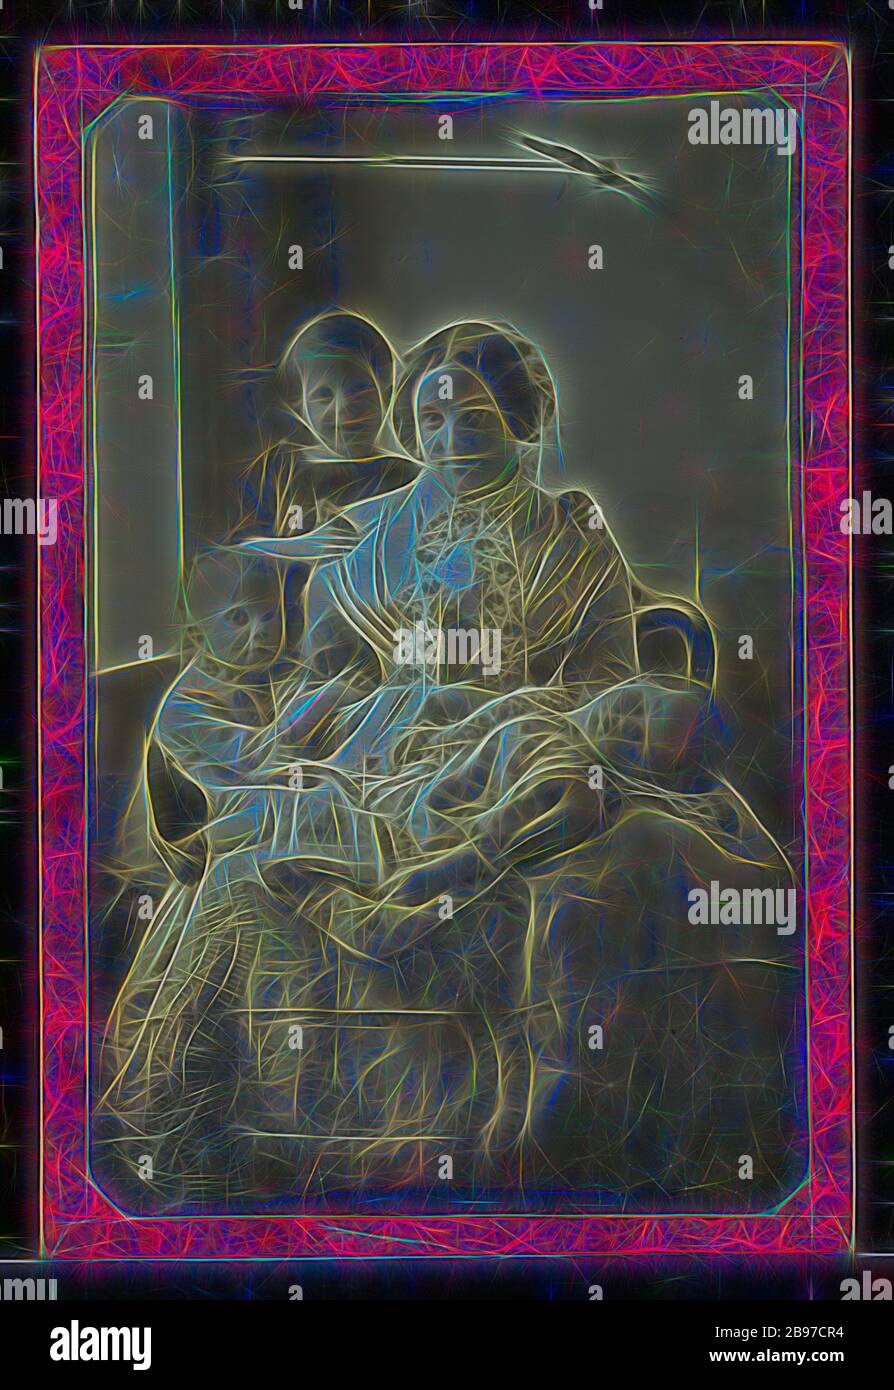 Artist's Wife and Their Three Children, Hermann Carl Eduard Biewend (German, 1814 - 1888), June 22, 1851, Daguerreotype, 15.2 × 9.8 cm (6 × 3 7/8 in.), Reimagined by Gibon, design of warm cheerful glowing of brightness and light rays radiance. Classic art reinvented with a modern twist. Photography inspired by futurism, embracing dynamic energy of modern technology, movement, speed and revolutionize culture. Stock Photo